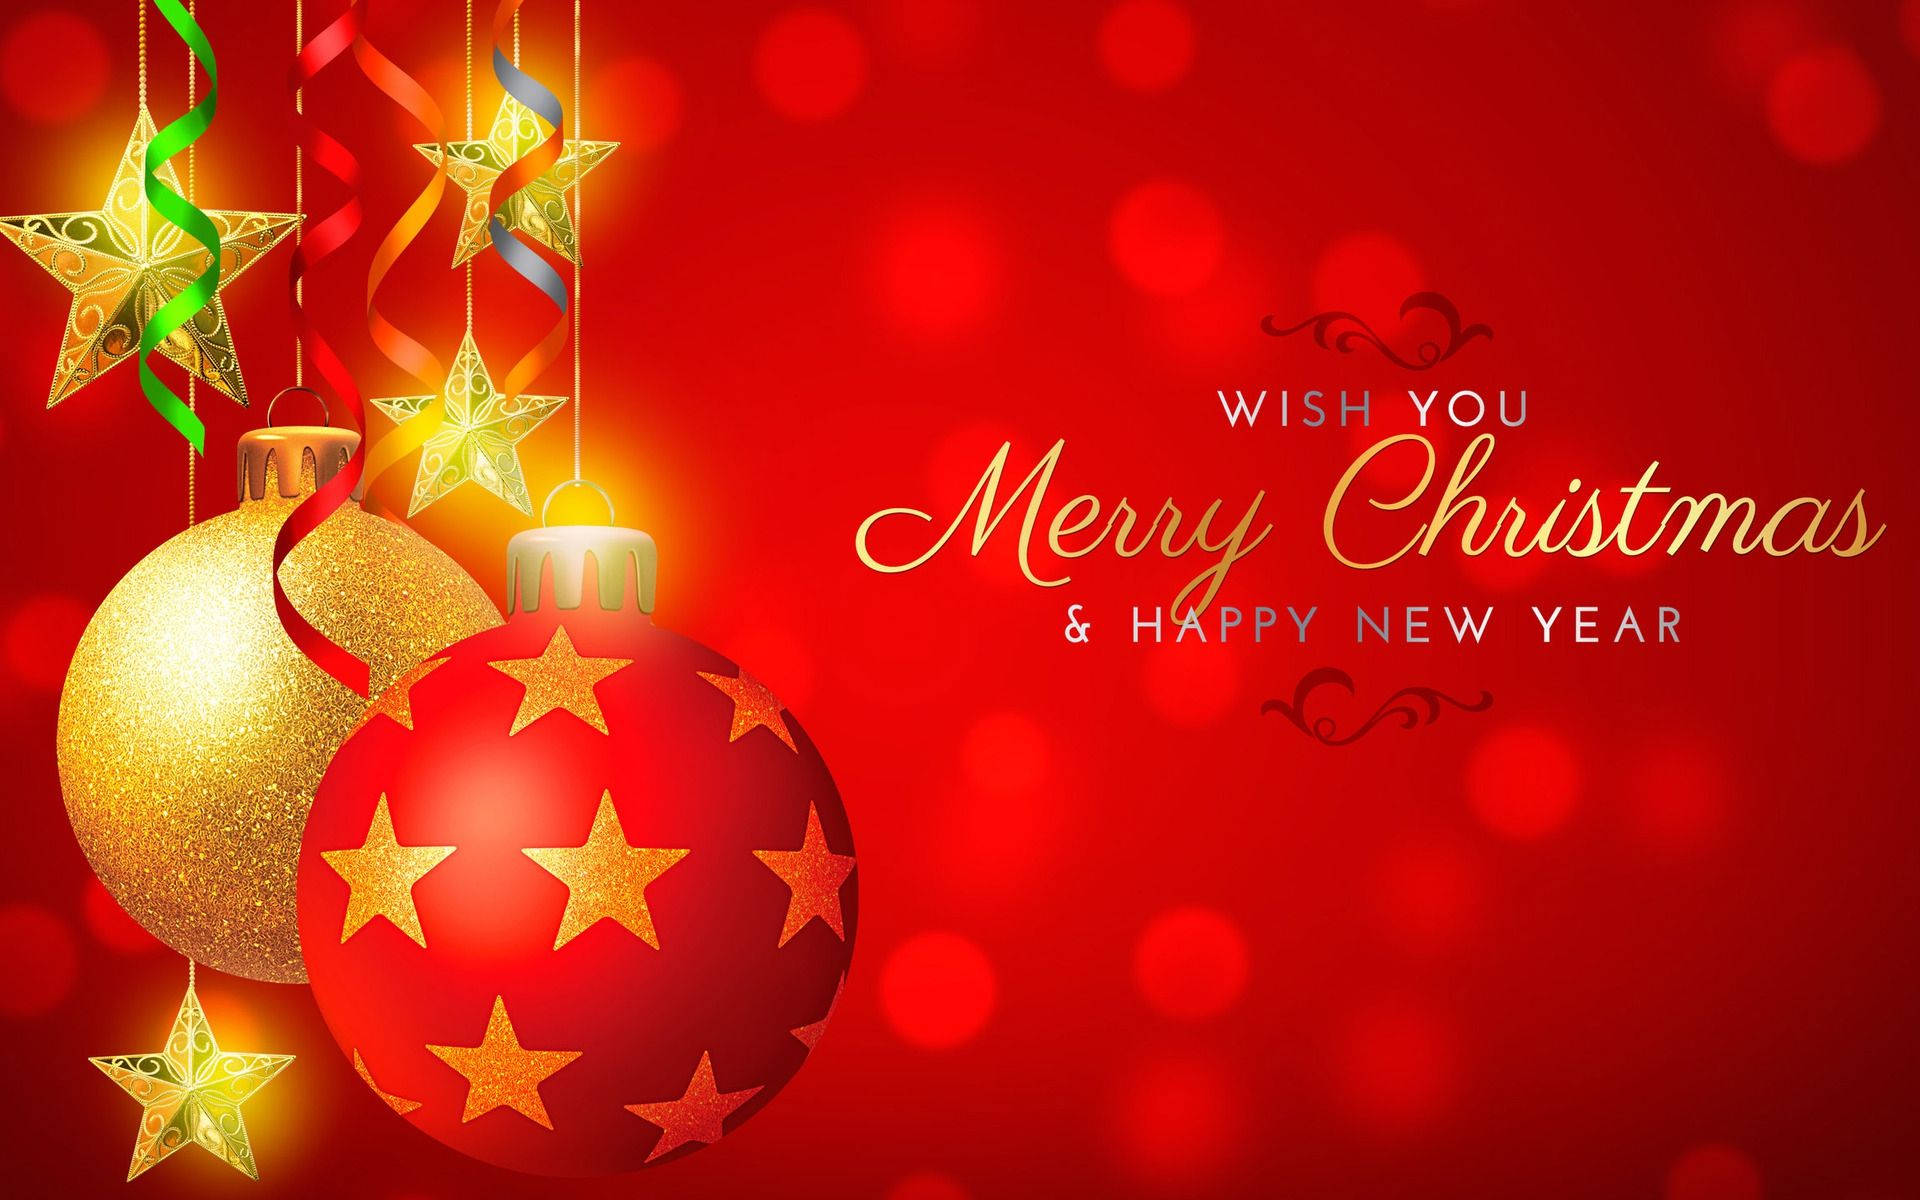 Download Wish You A Merry Christmas Background Wallpaper 